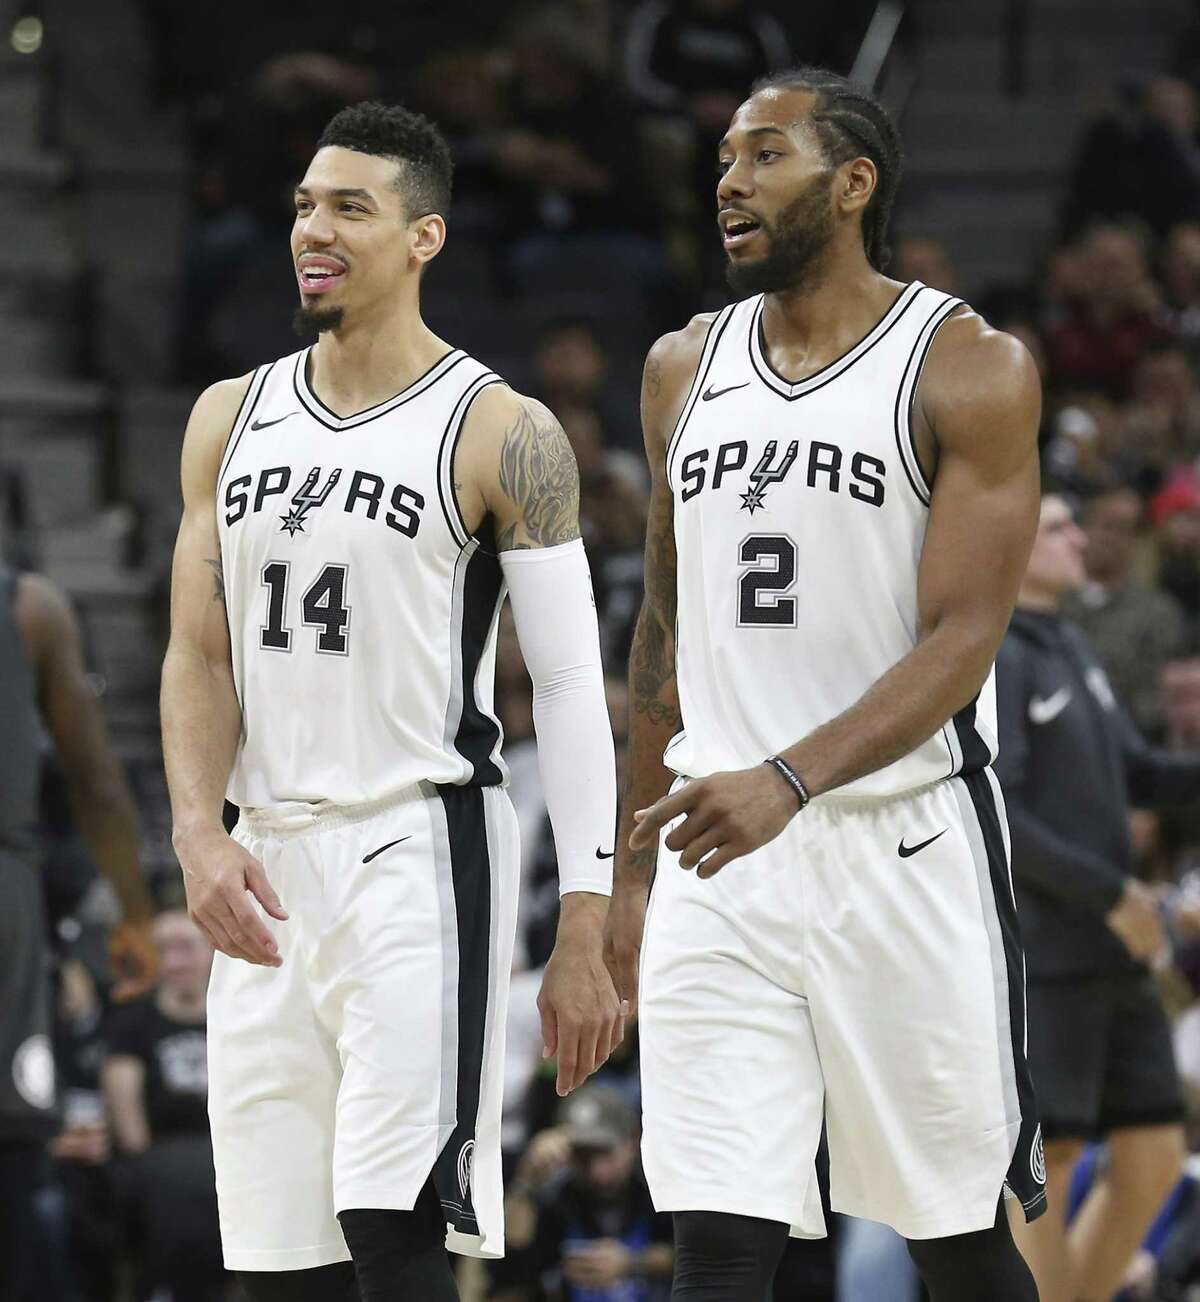 Spurs' Danny Green (14) and Kawhi Leonard (02) appear together in a game against the Brooklyn Nets at the AT&T Center on Tuesday, Dec. 26, 2017. Reports emerged on Wednesday, July 18, 2018 that both Leonard and Green were traded to the Toronto Raptors in a trade for DeMar DeRozan, Jakob Poeltl and a future draft picks. (Kin Man Hui/San Antonio Express-News)